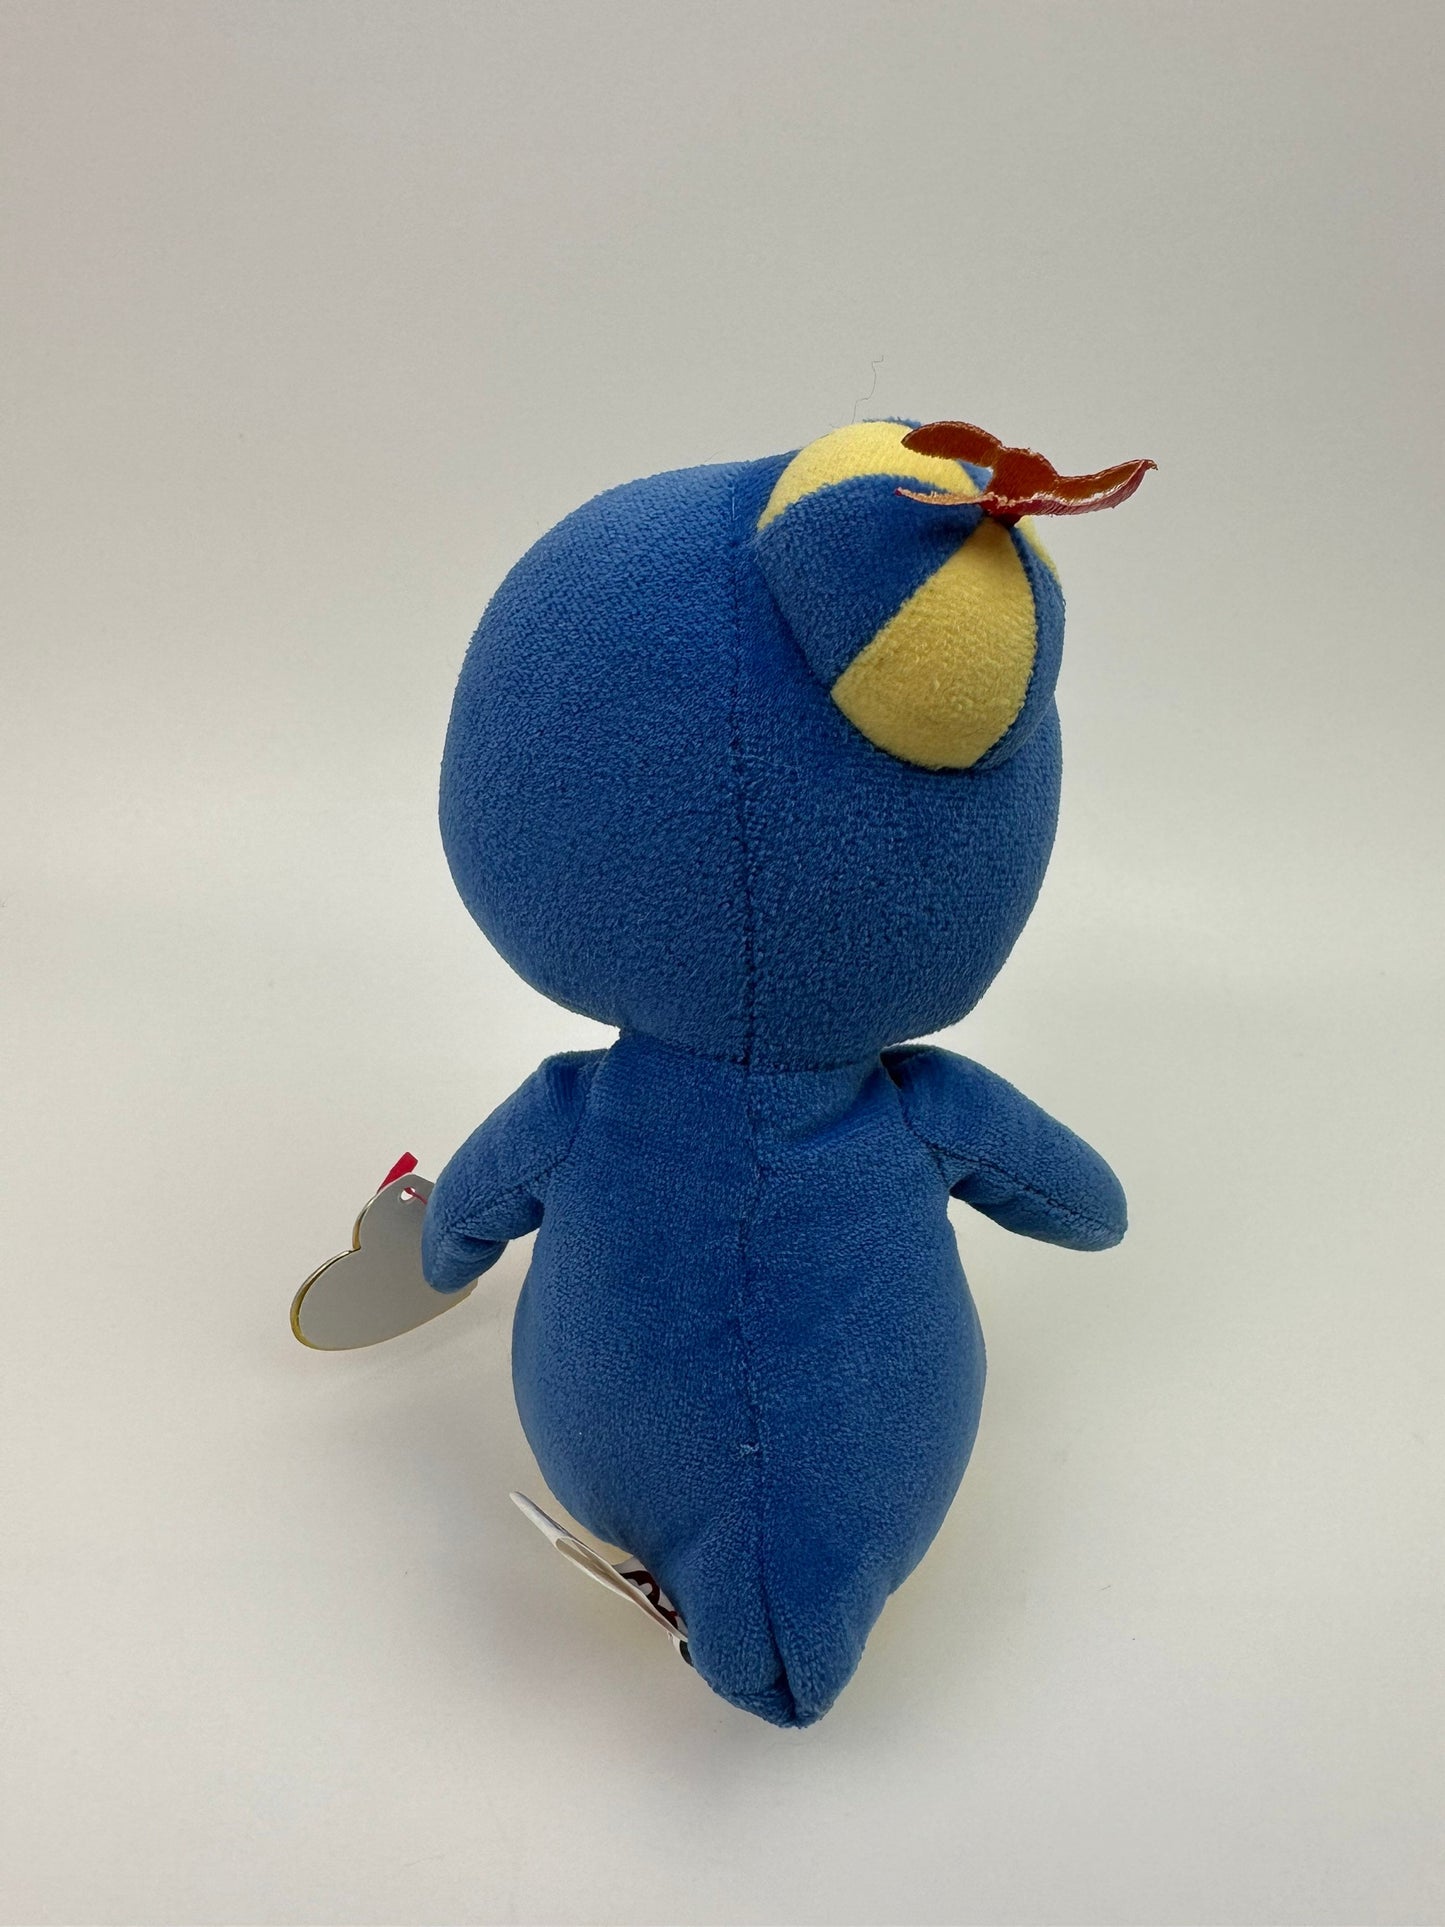 Ty Beanie Baby “Pablo” the Penguin - The Backyardigans (6 inch)